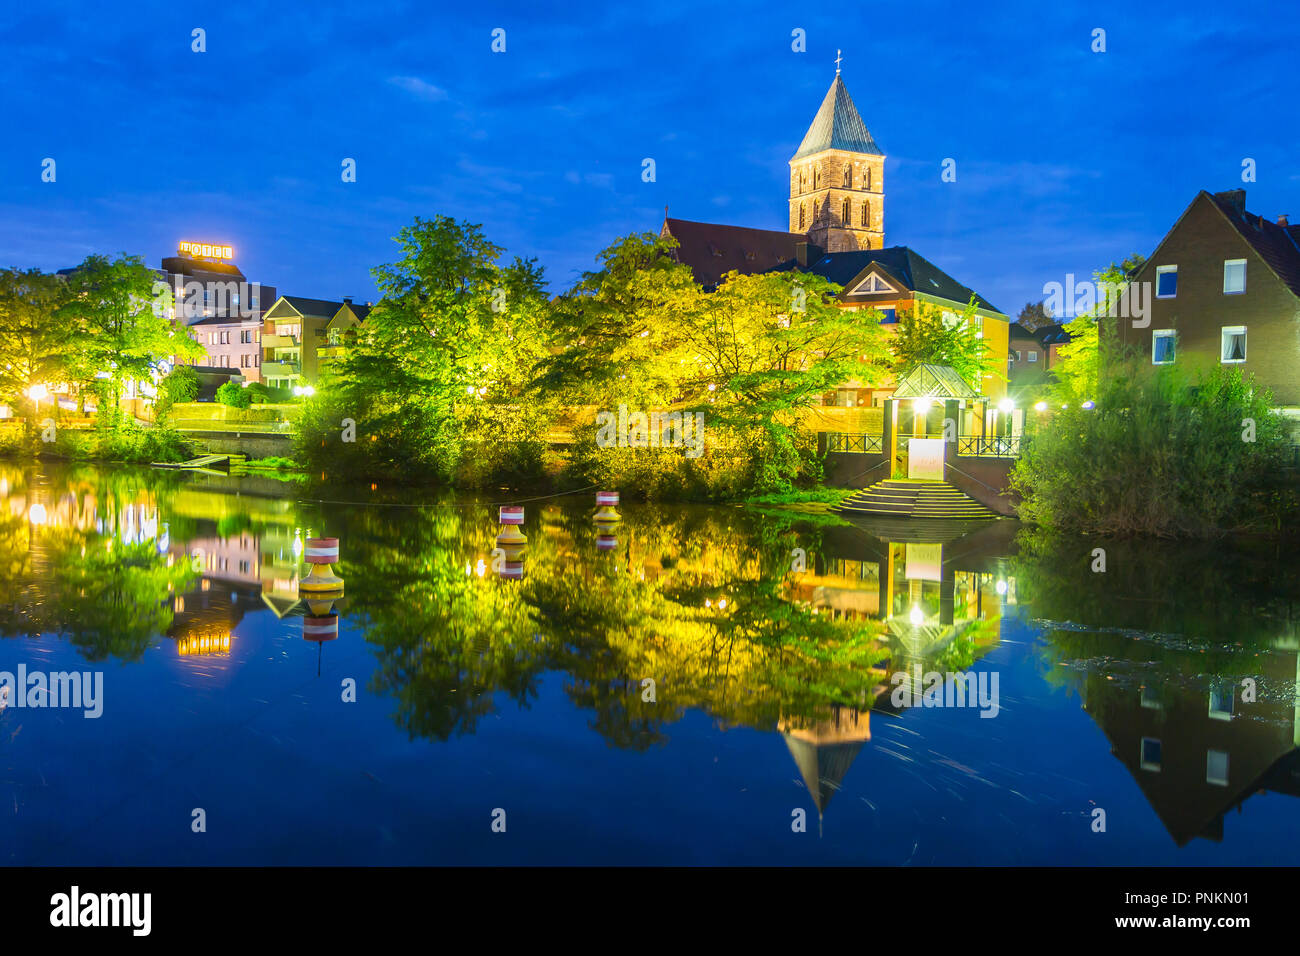 Rheine, Germany - September 5, 2018: night view belfry tower of medieval Sankt Antonius Basilica reflecting on in the still waters of Ems river Stock Photo